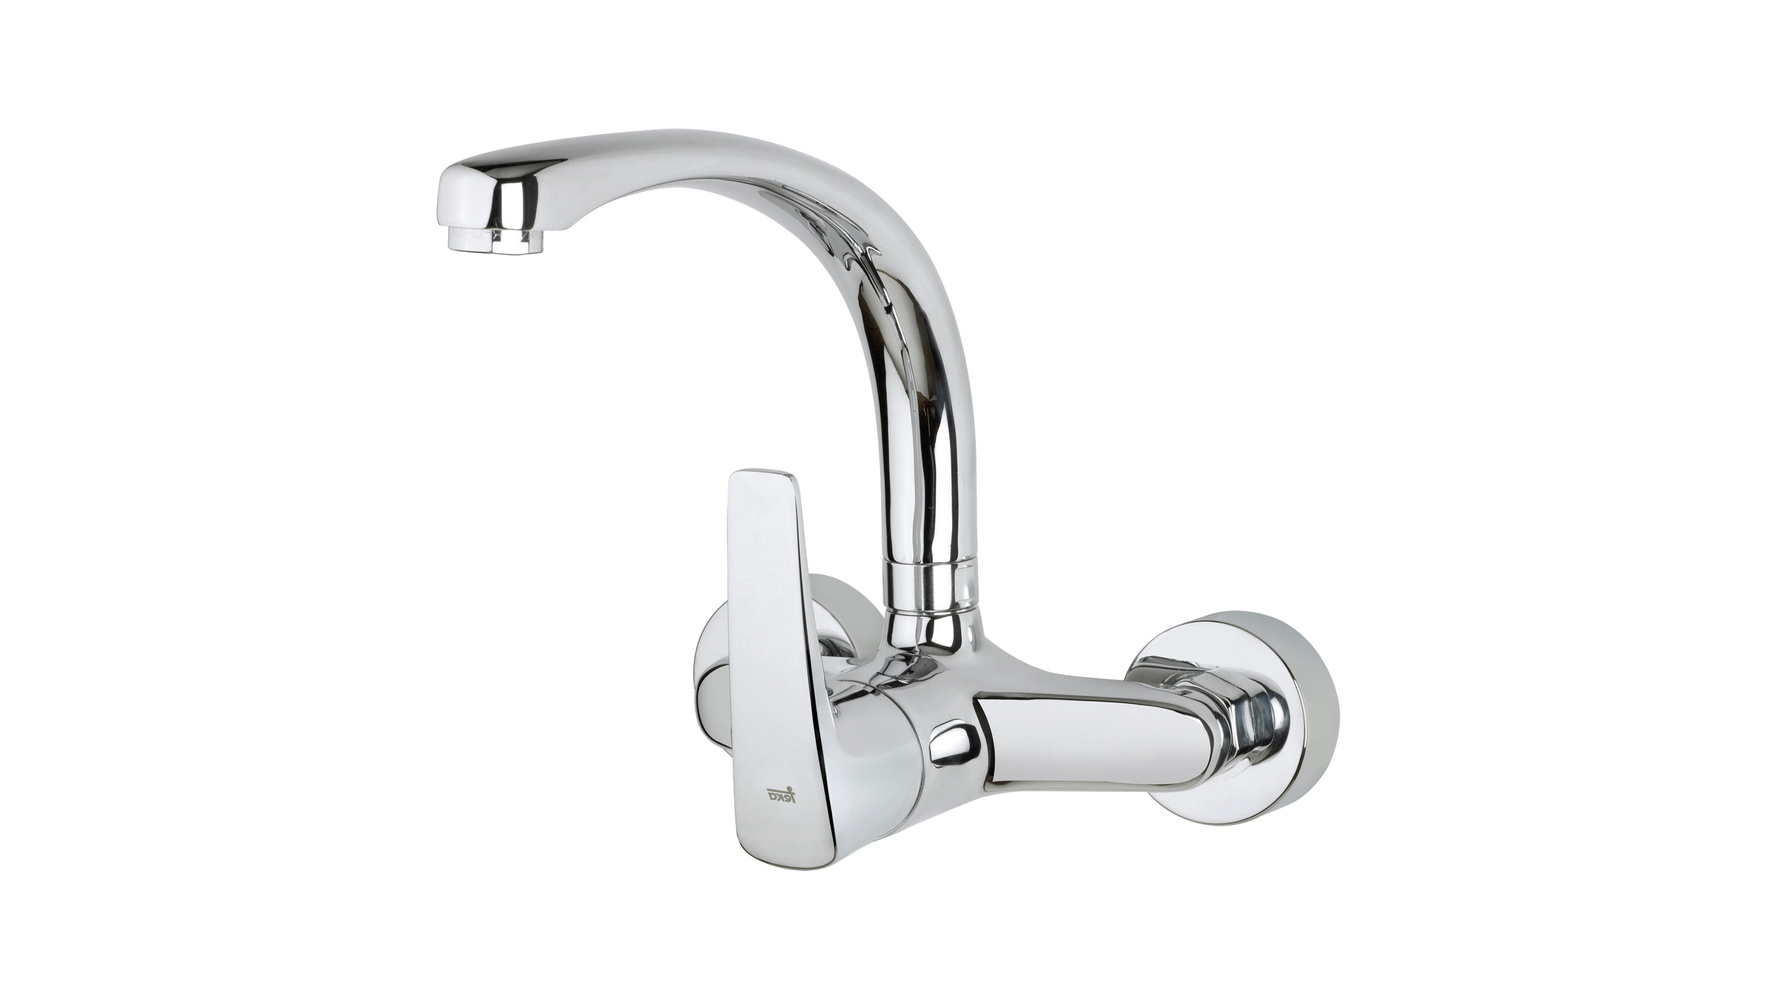 Wall-mounted single handle kitchen tap with cast swivel spout